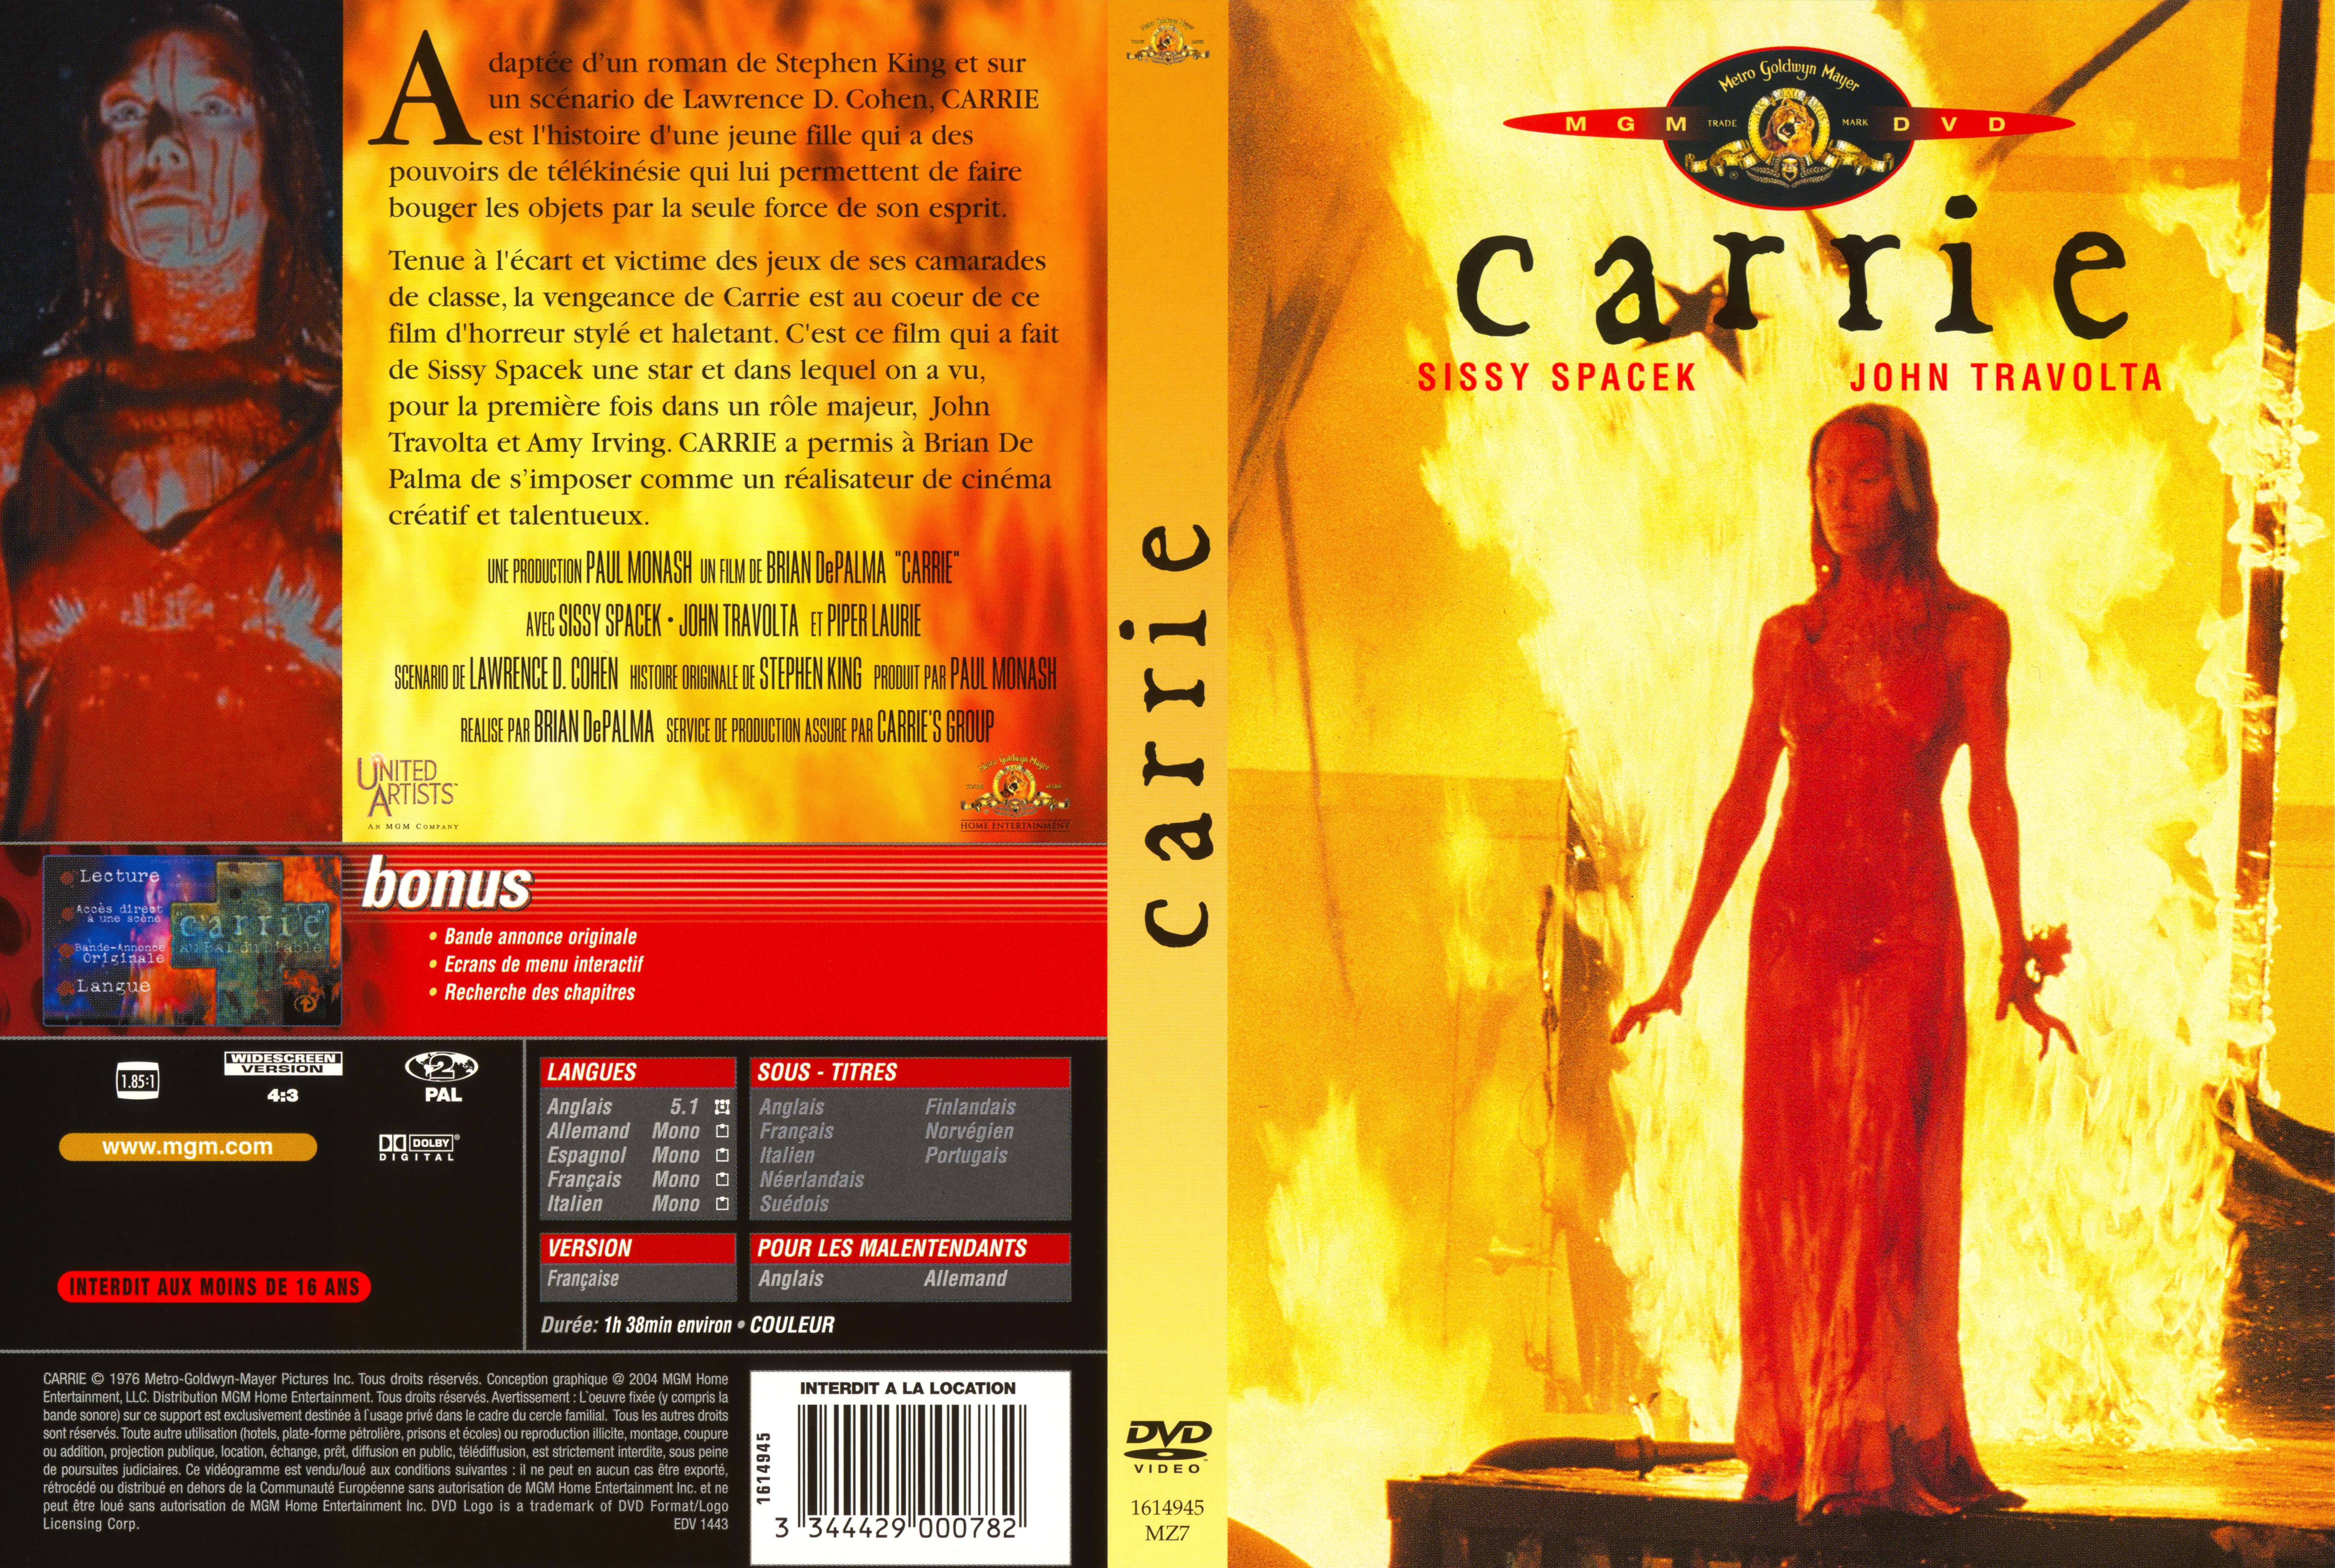 Jaquette DVD Carrie v3